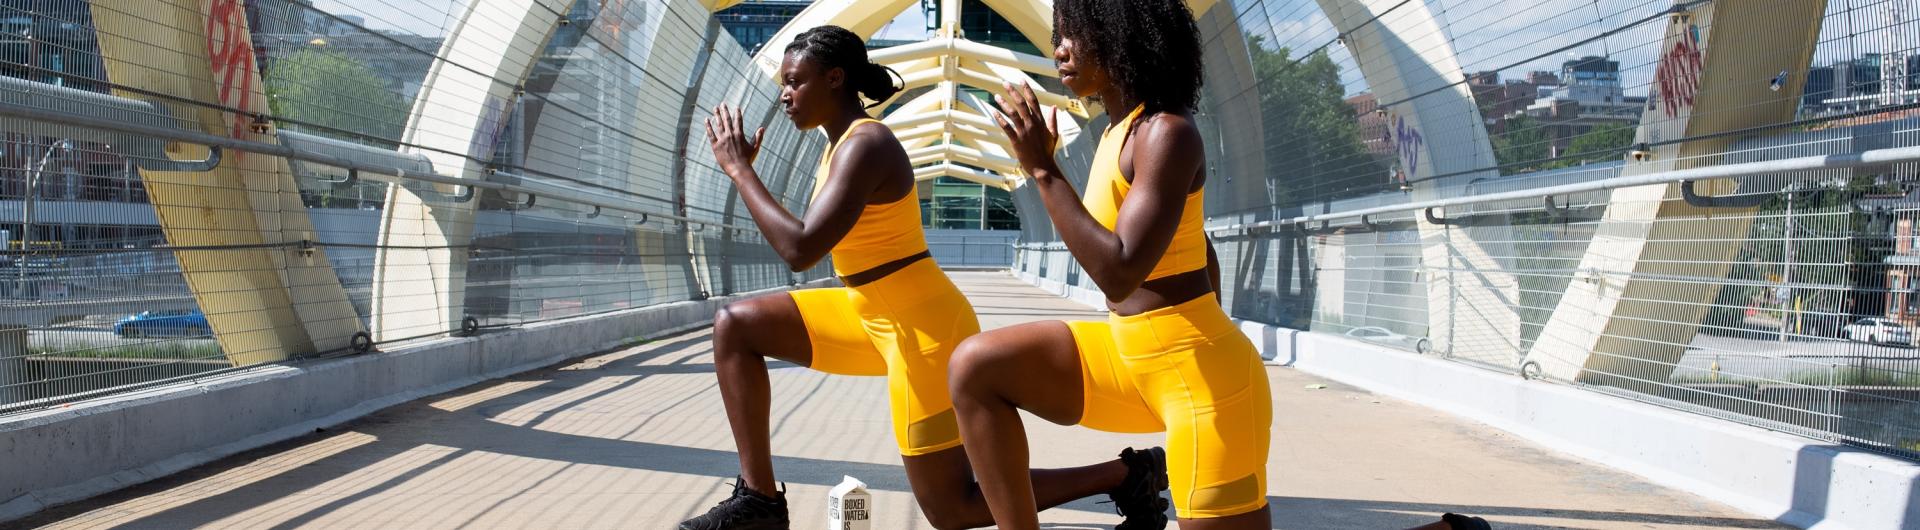 two women doing lunges